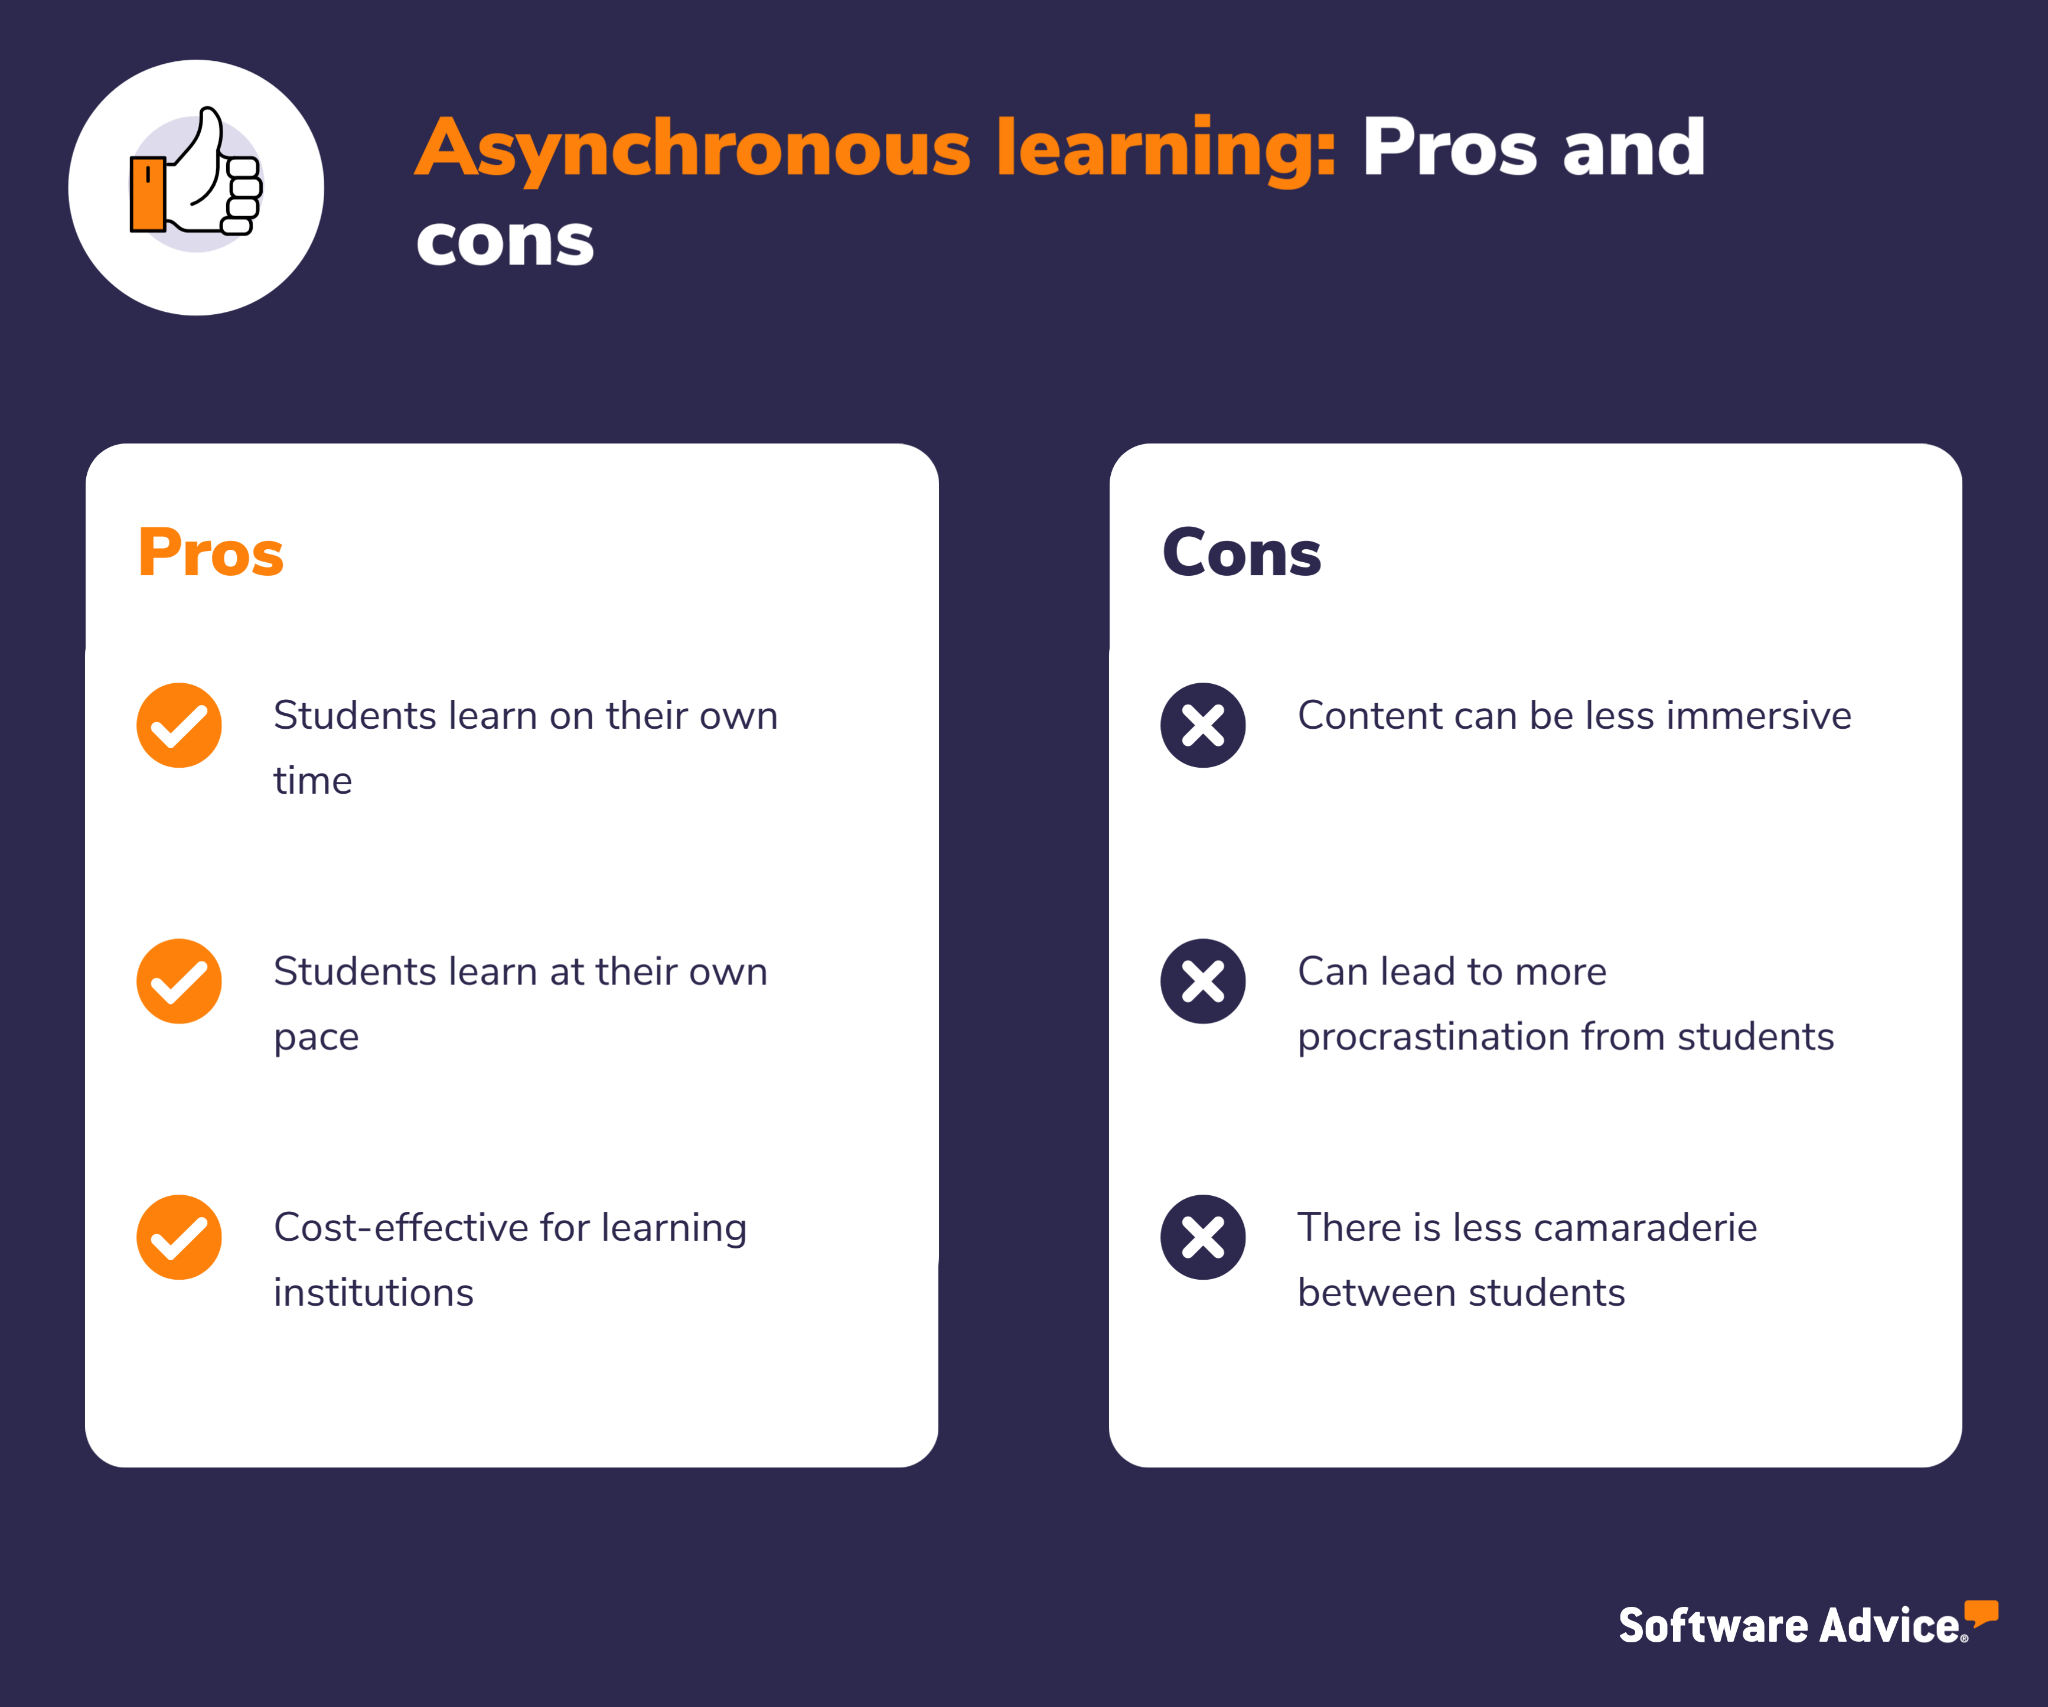 Virtual Learning versus In-Person: What Are the Pros and Cons